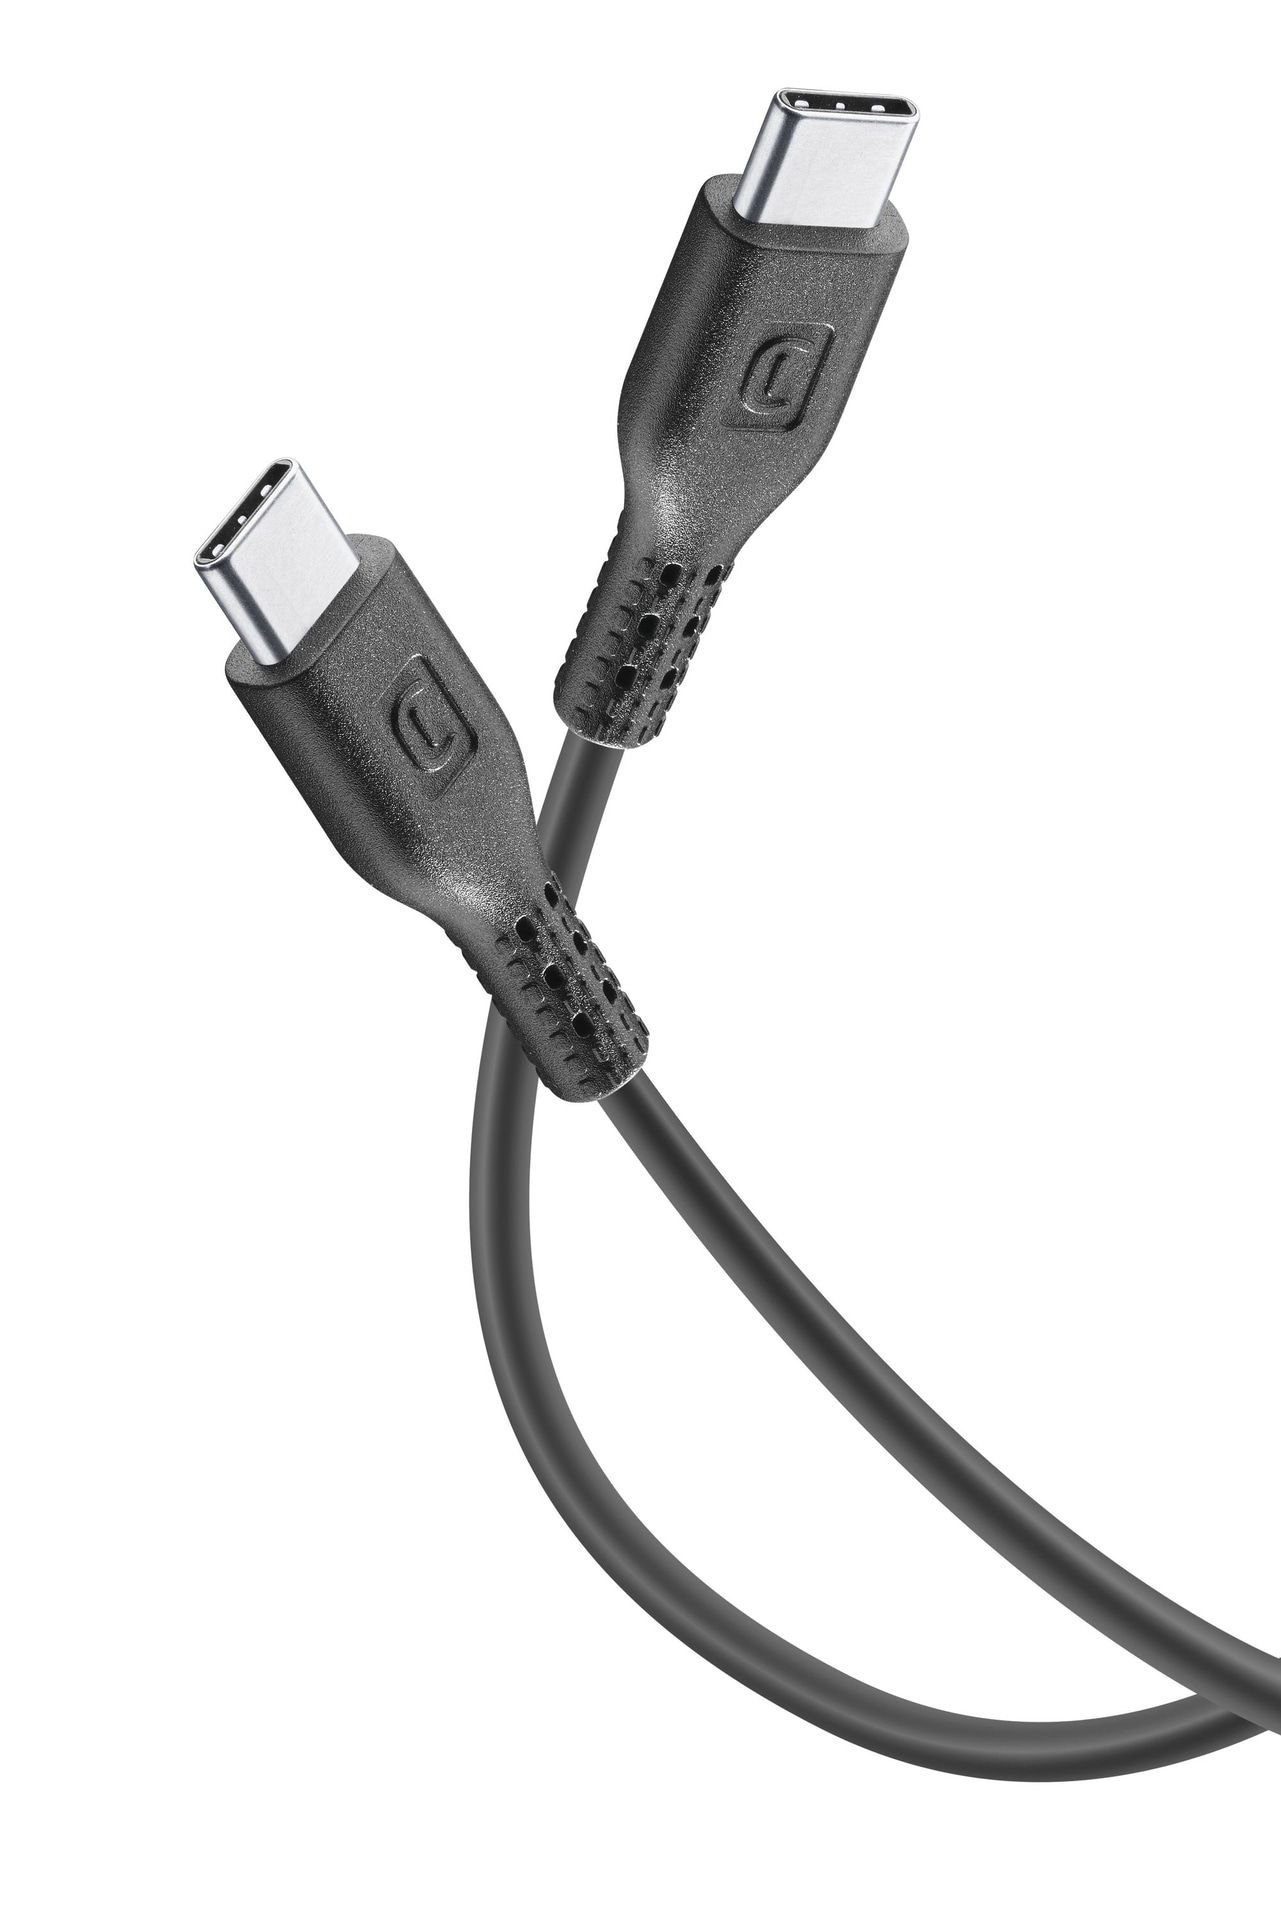 Cellularline USB-Kabel »5A Power Data Cable 1 m USB Typ-C / Typ-C«, USB Typ C-USB Typ C, 100 cm